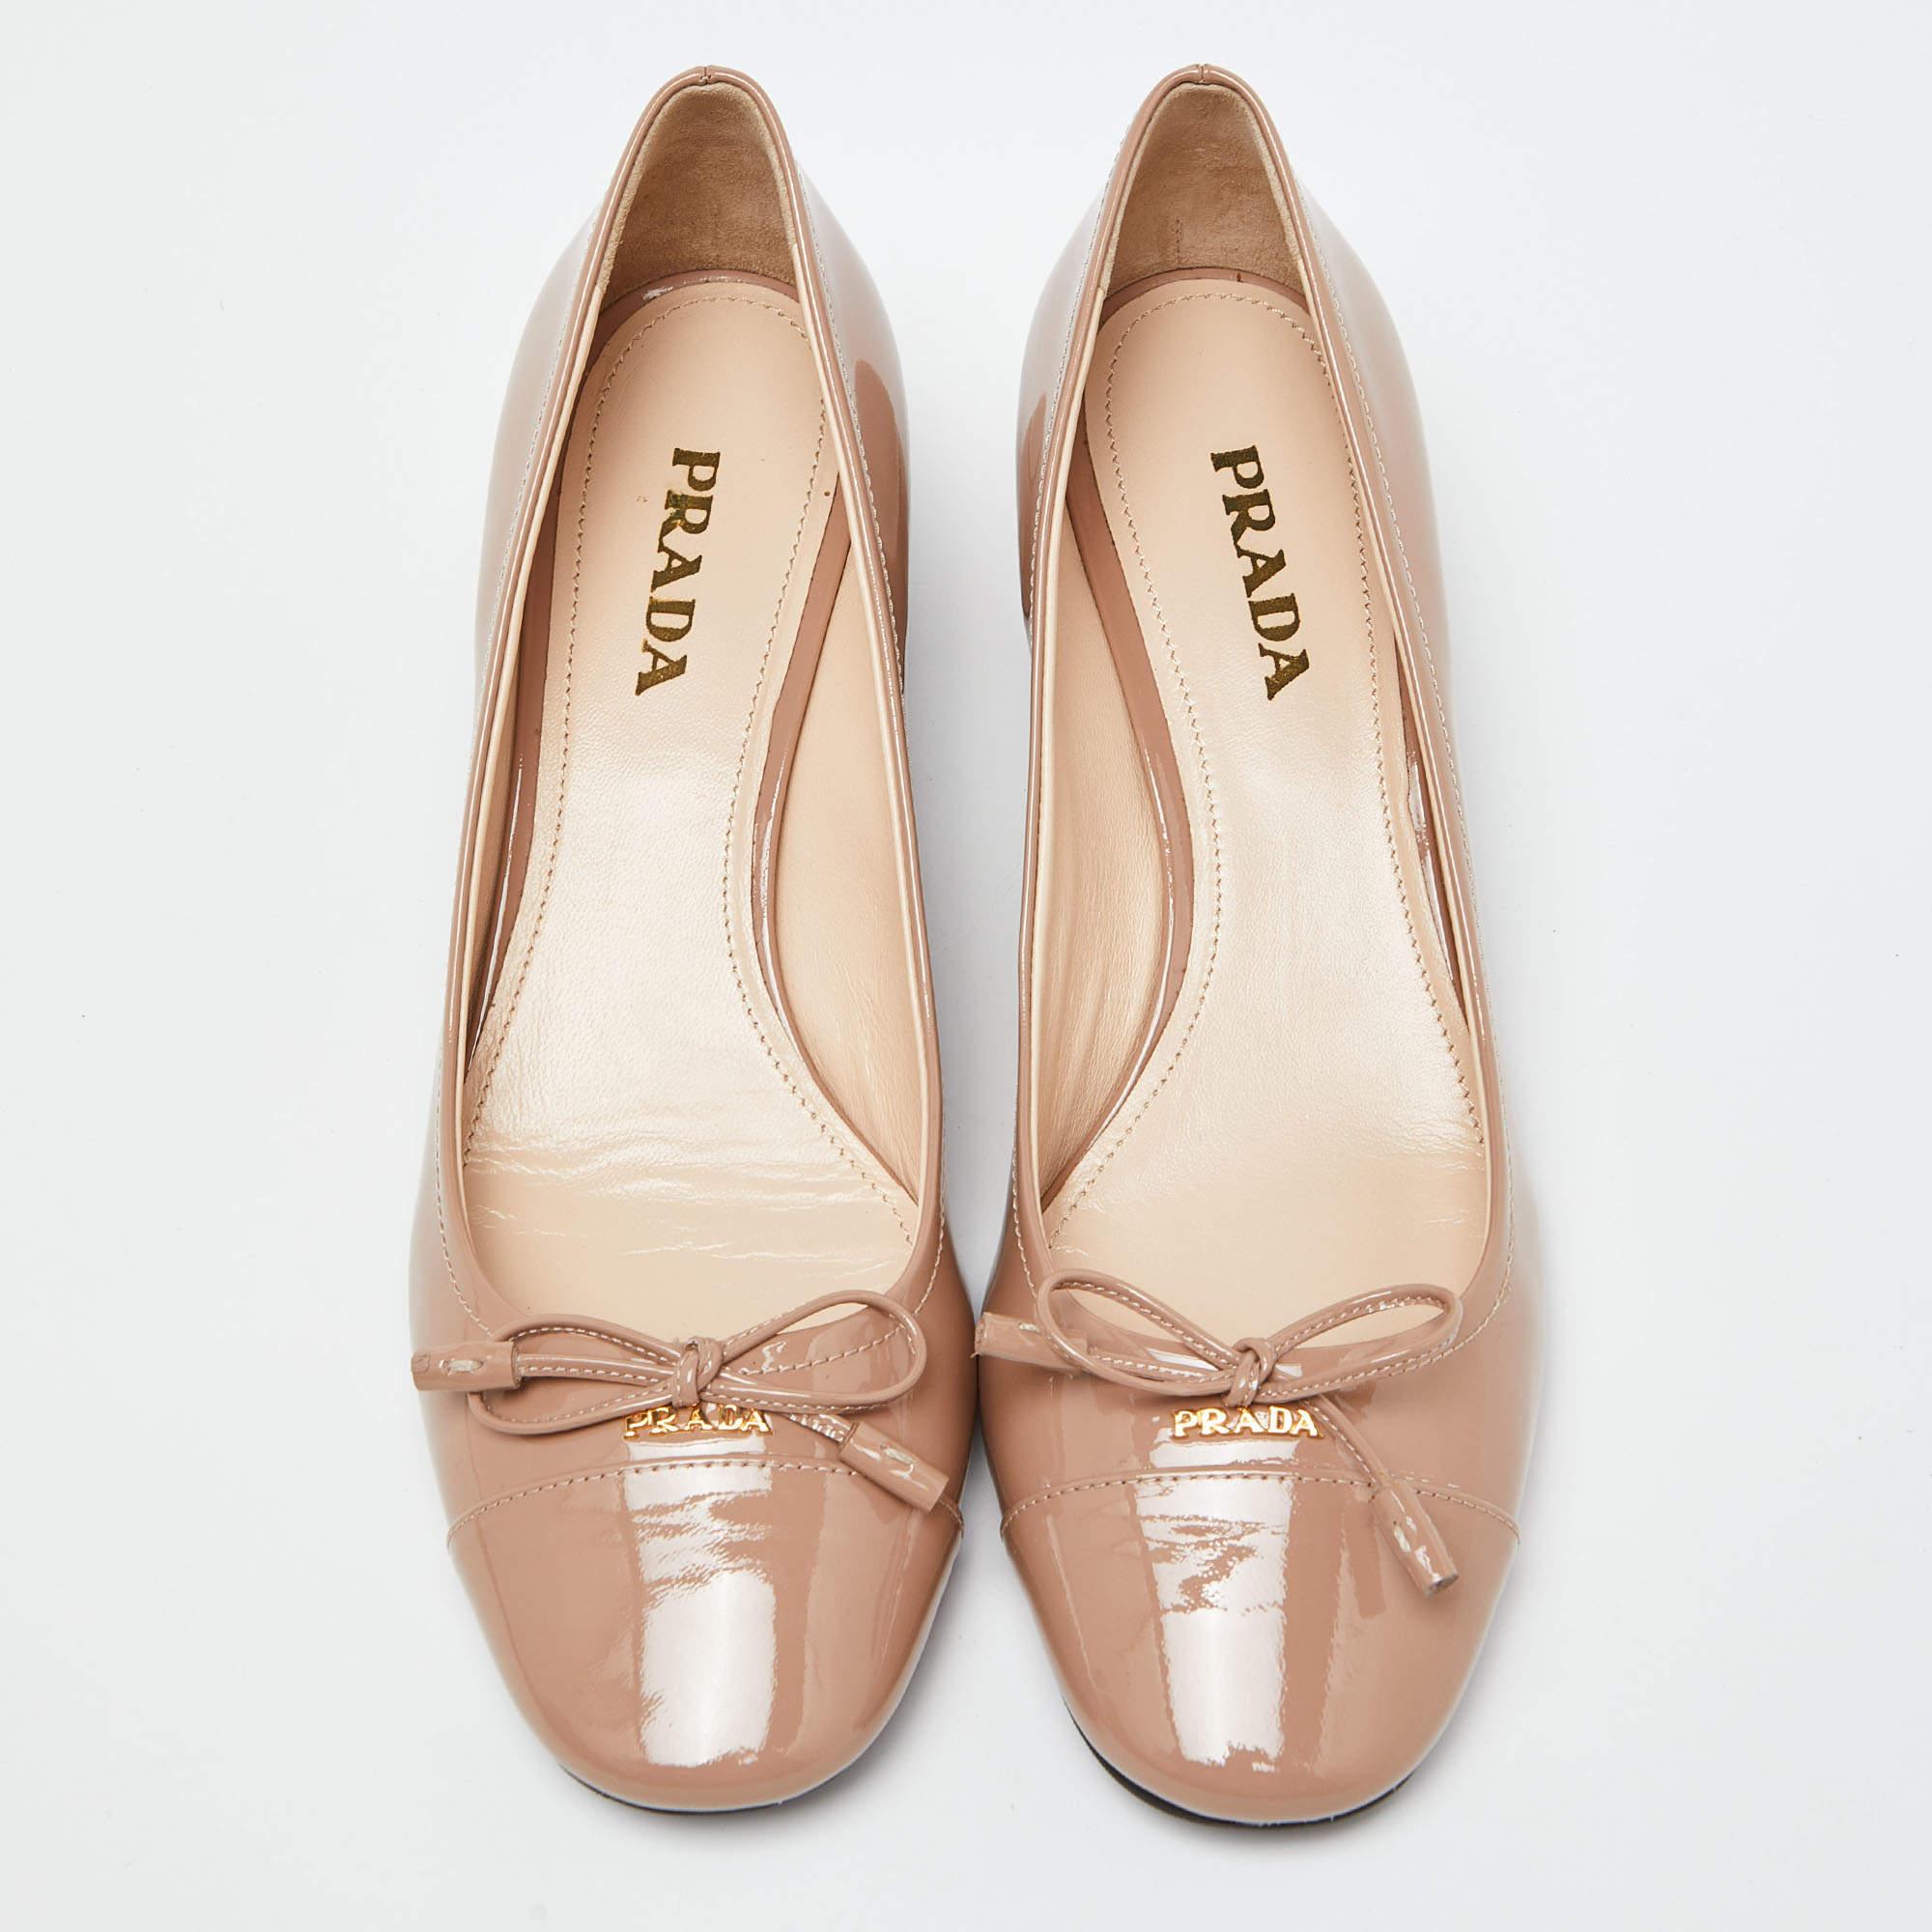 Exhibit an elegant style with this pair of pumps. These elegant shoes are crafted from quality materials. They are set on durable soles and sleek heels.

Includes
Original Box, Info Booklet